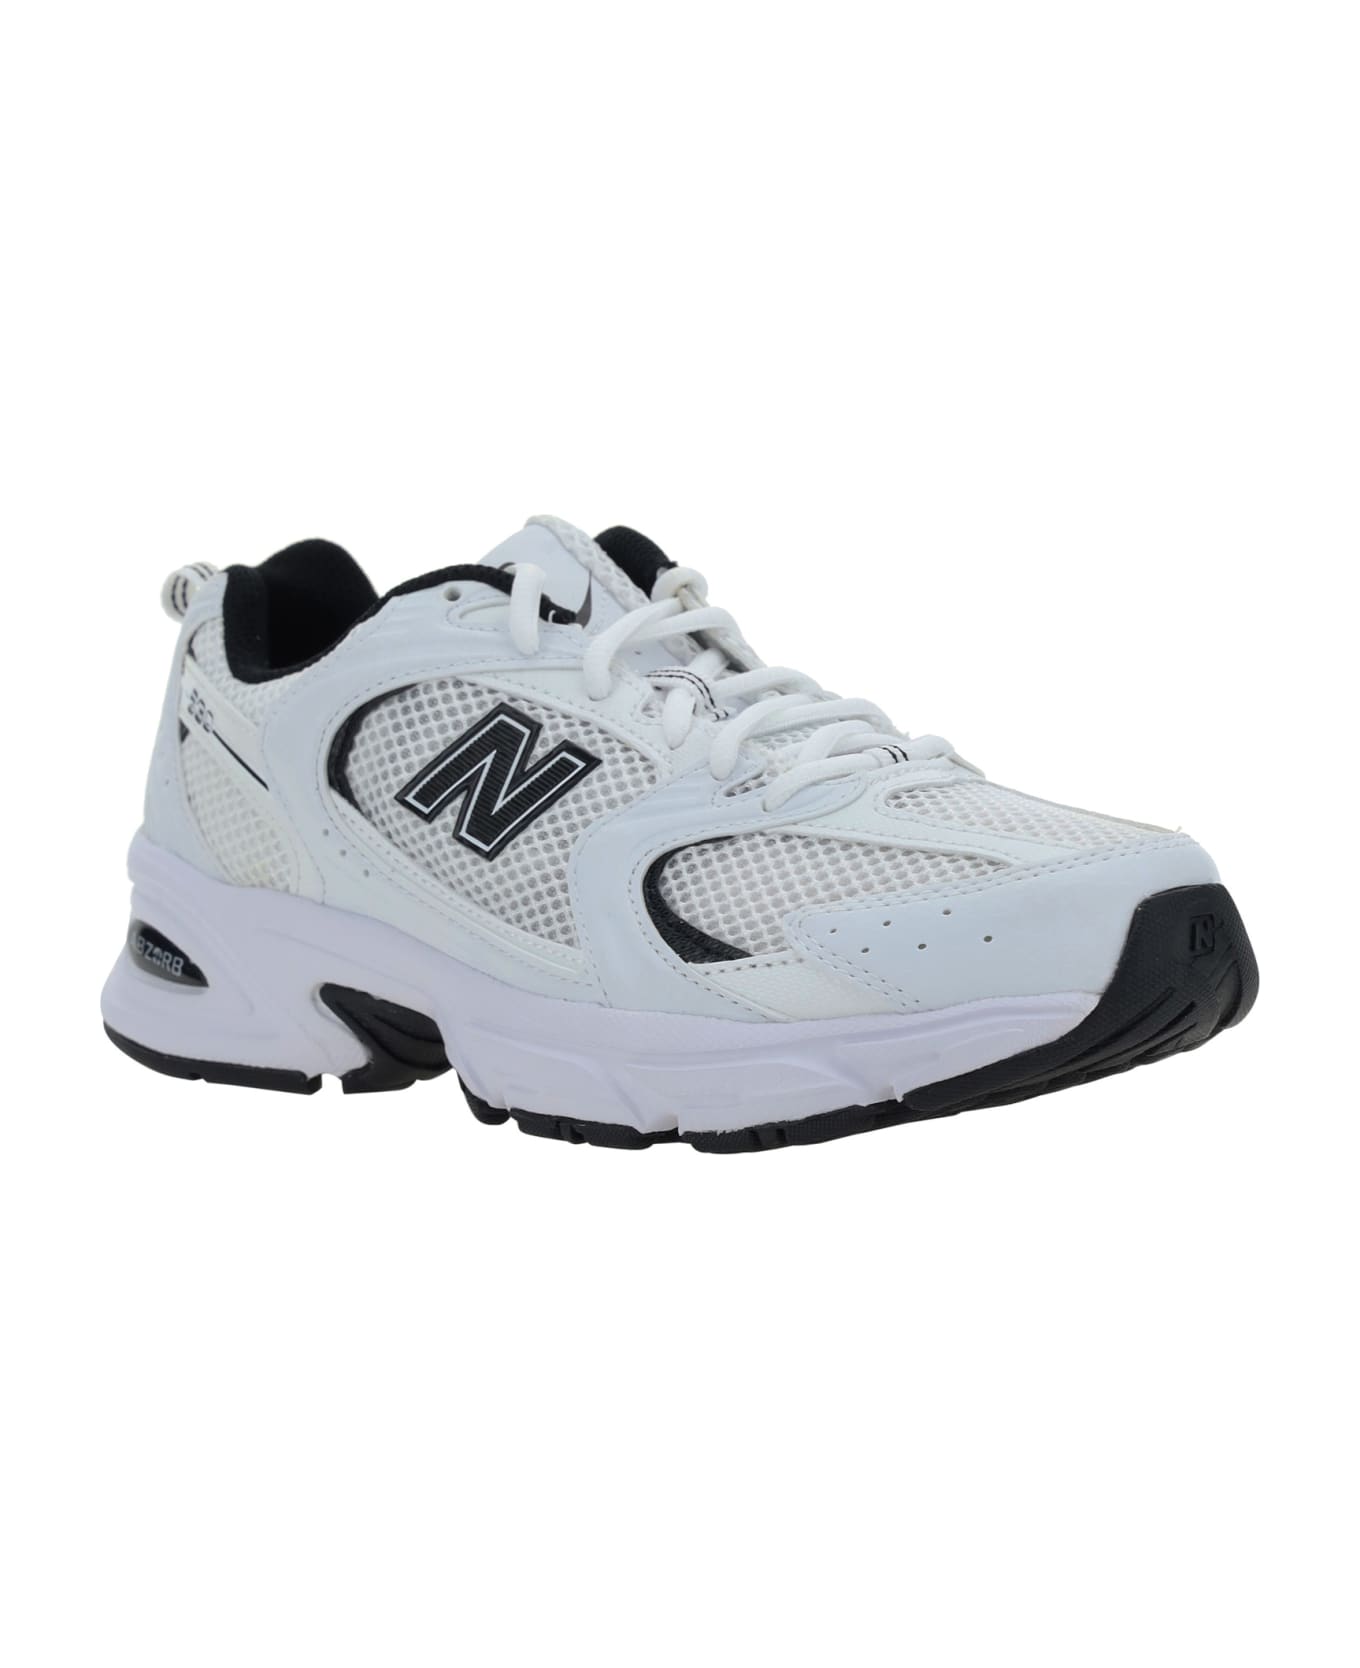 New Balance Lifestyle Sneakers - White スニーカー